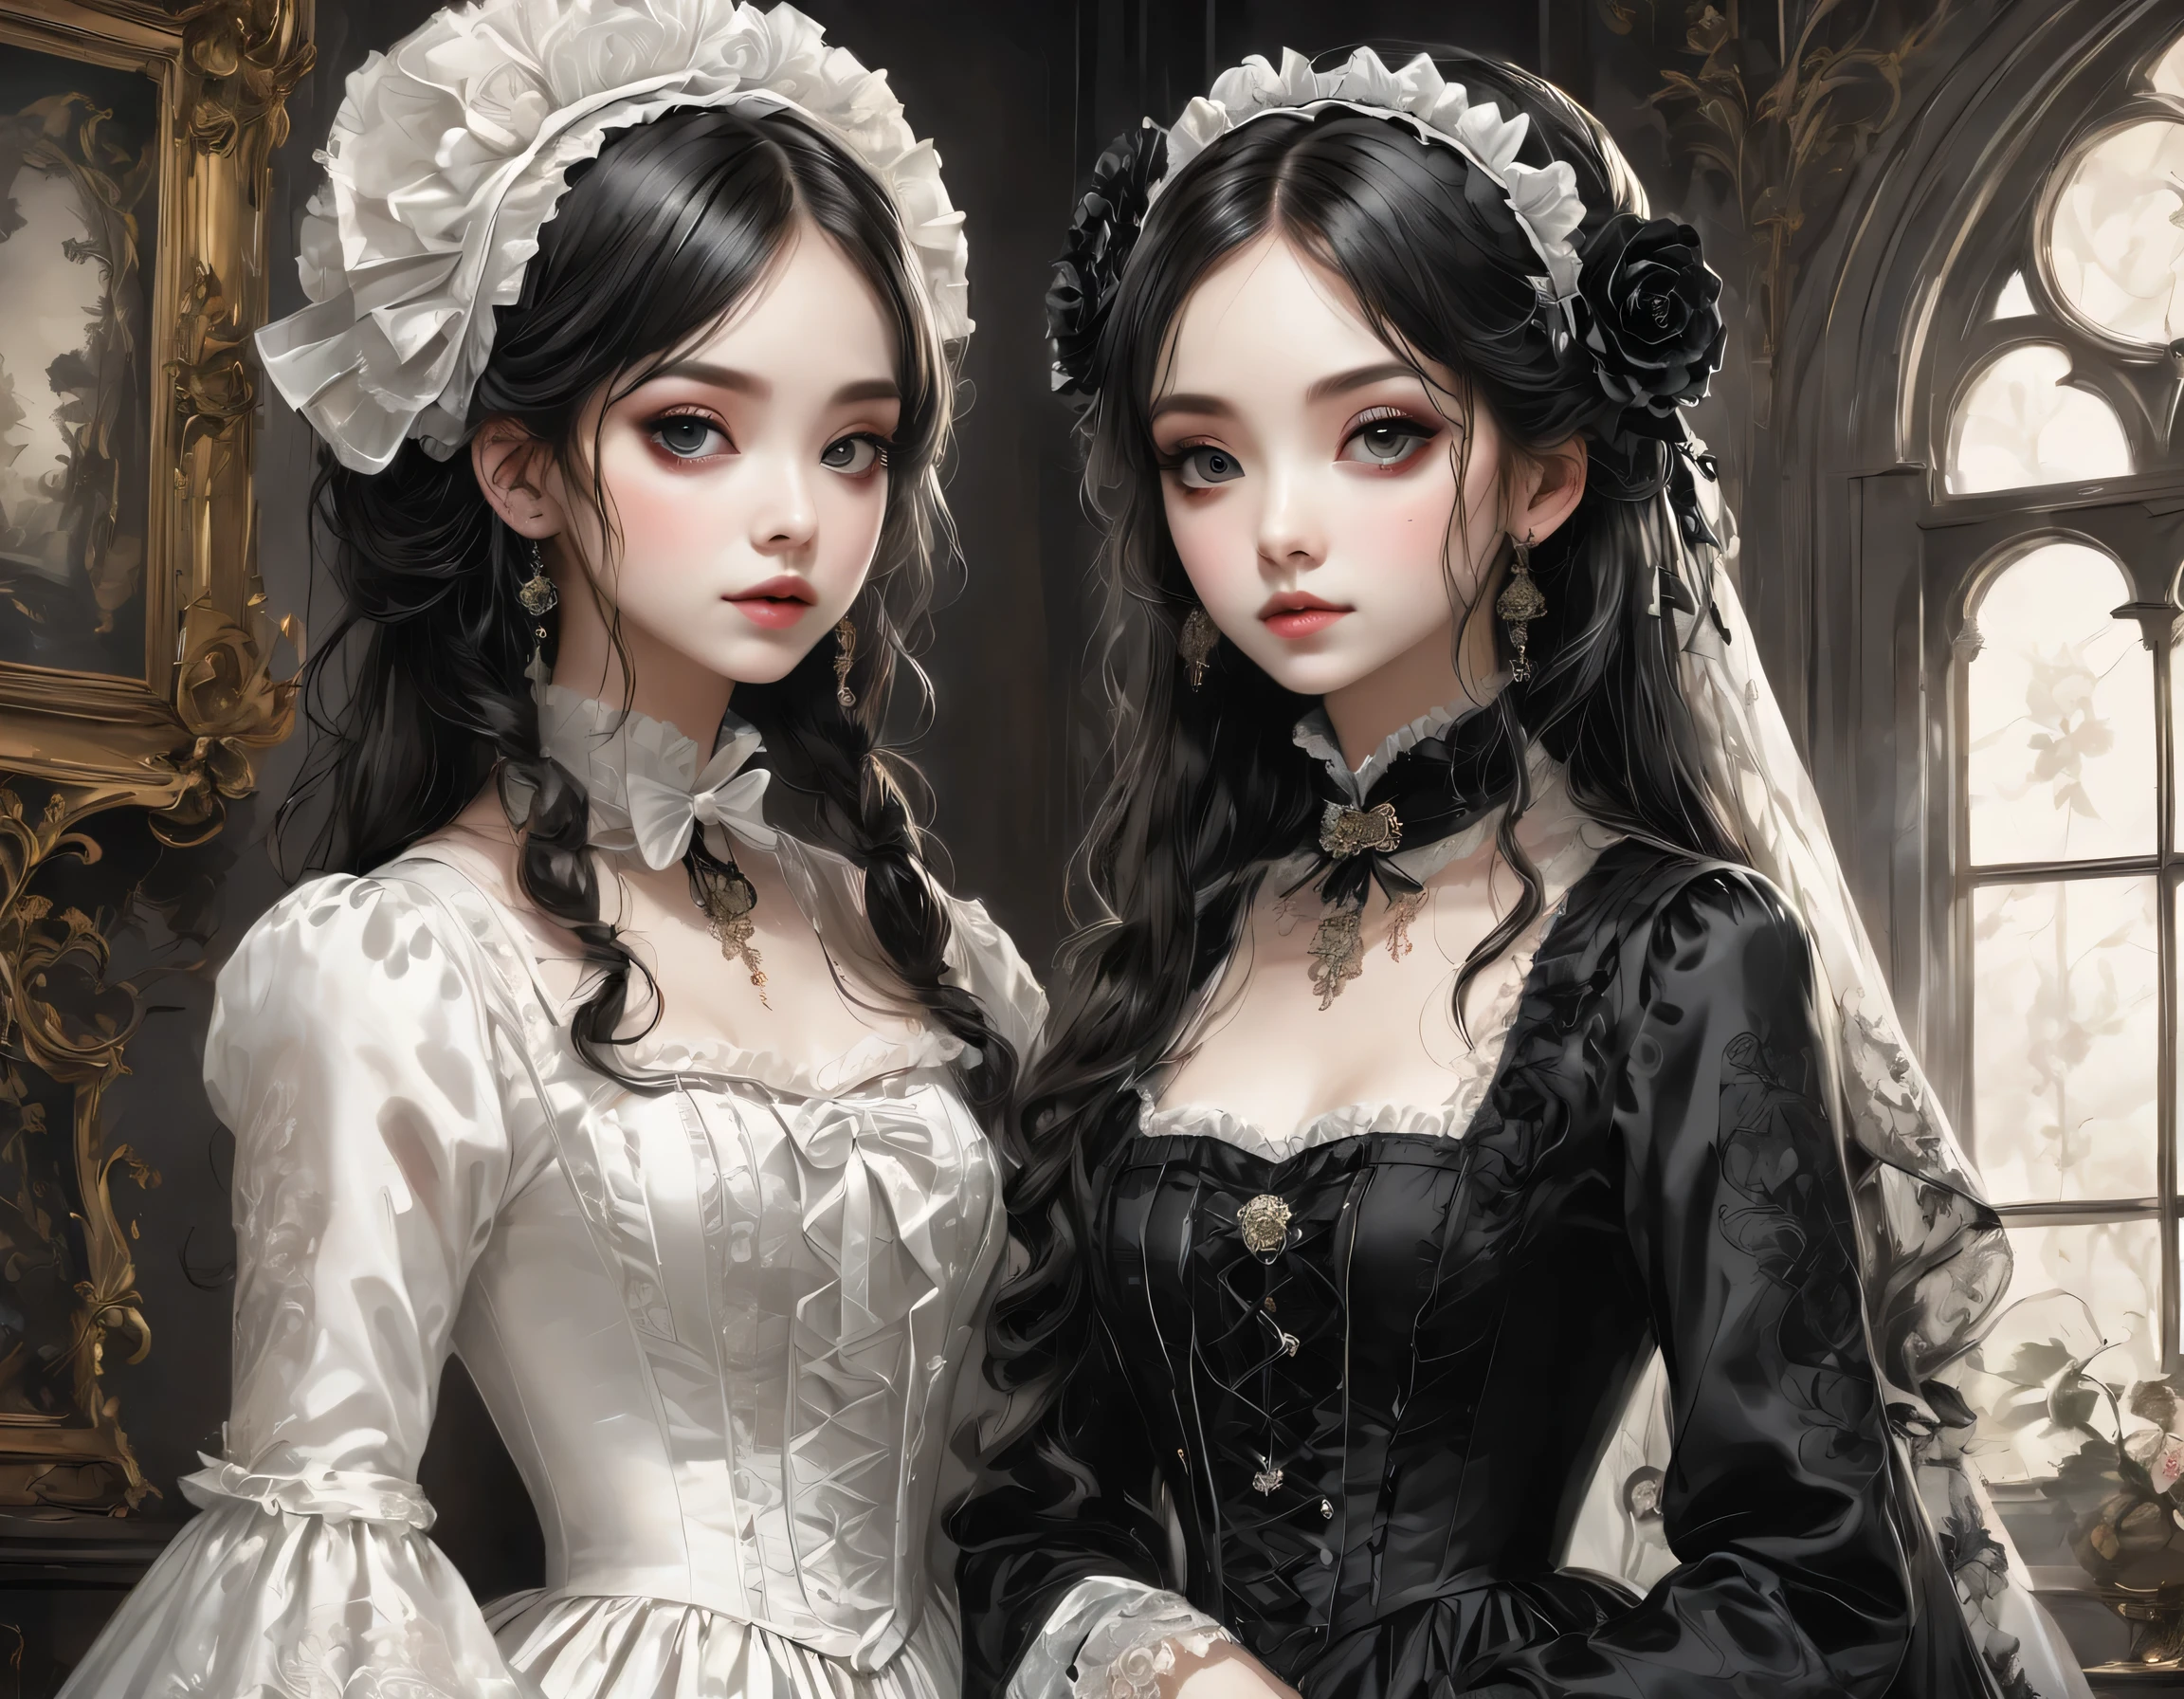 Gothic horror paintings,((Two beautiful girls standing:Symmetric:Gothic Lolita:12 years old:Ephemeral:Two beautiful girls:cute:Adorable:Perfect Face:White:eyelash:Big eyes)),Gothic House,Looking Back,black and white,scary but beautiful,Gothic Beauty,Expressing beautiful madness,Shrouded in mystery,Placing dark clouds that foreshadow tragedy in a beautiful gothic house,,detailed,Use red as an accent color,Race,embroidery,Detailed pattern,rendering,Designer House,Luxury Homes,nice,quiet,Beautiful light and shadow,Gothic Room,Golden Ratio,Anatomically correct,Rococo,BREAK,(The girl on the right(Black Dress)Gothic Lolita),BREAK,(The girl on the left(White Dress)Gothic Lolita)